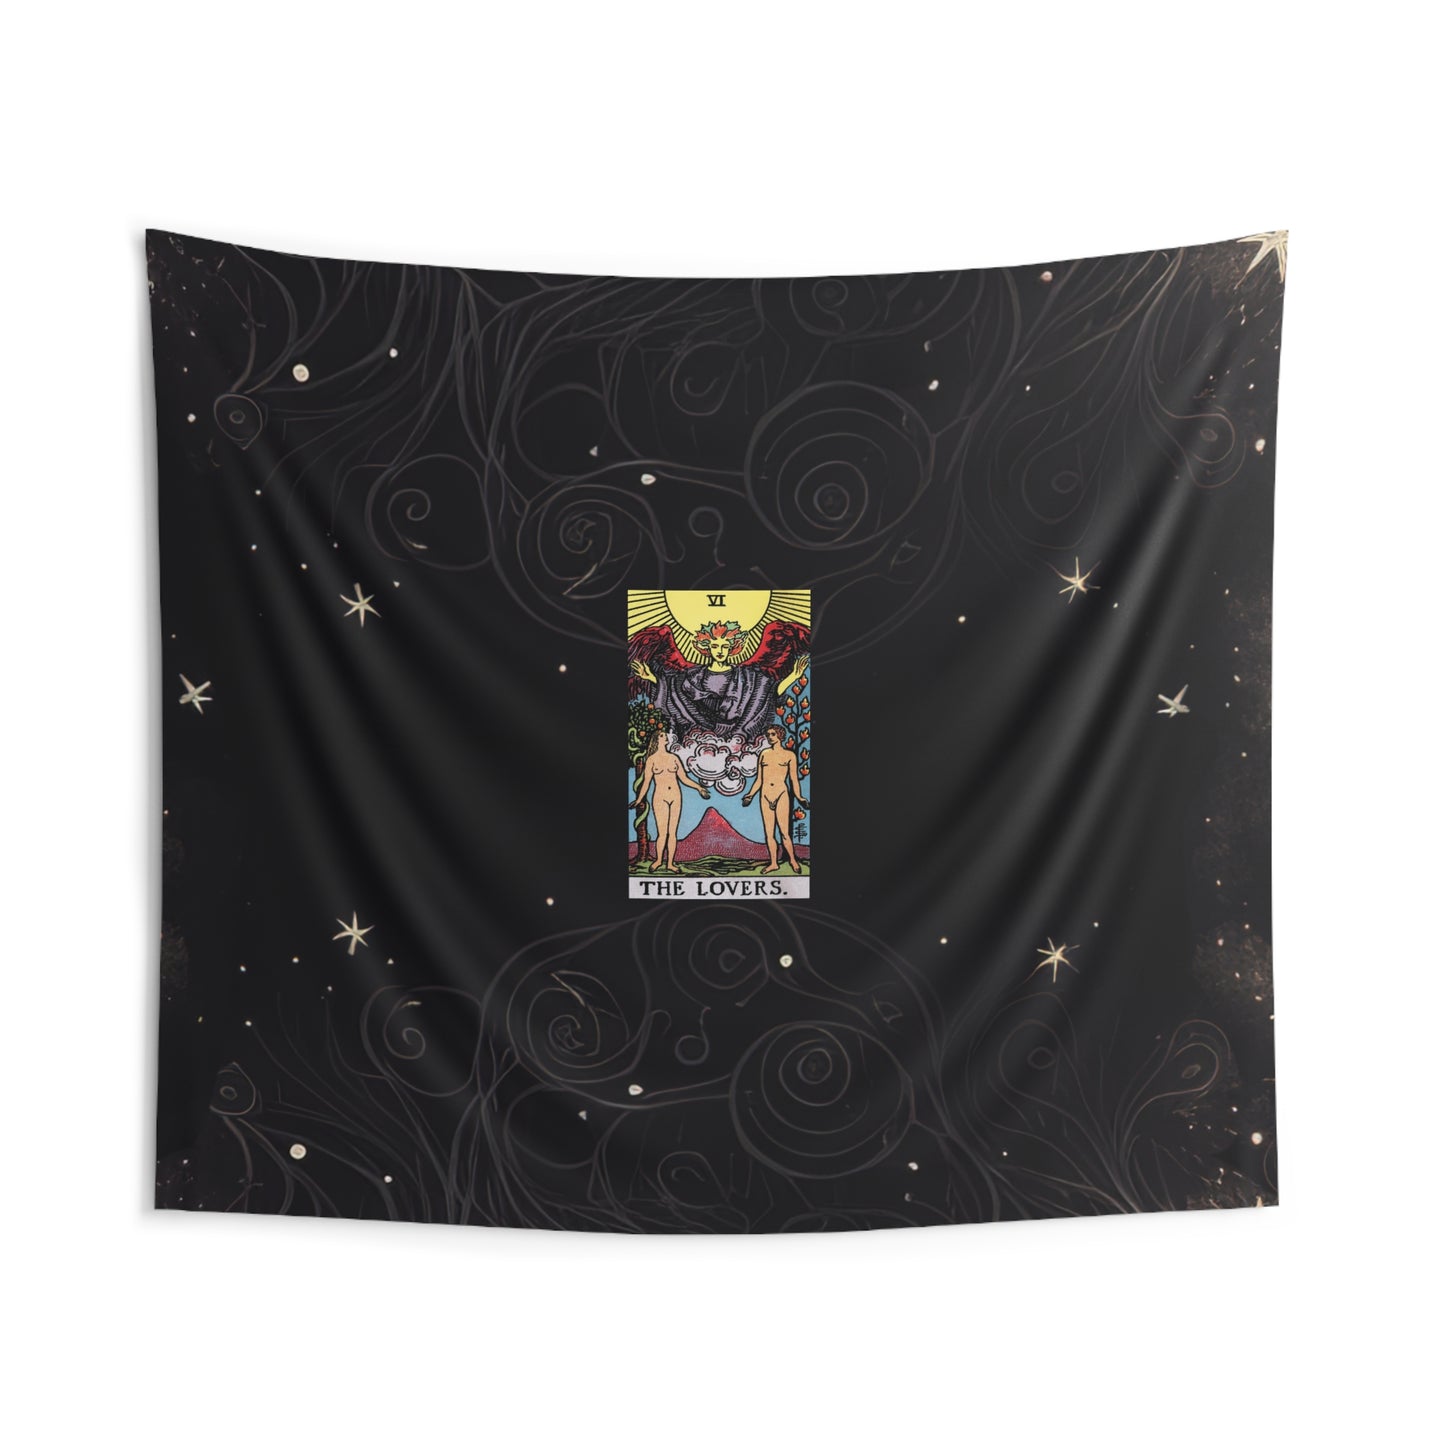 The Lovers Tarot Card Altar Cloth or Tapestry with Starry Background